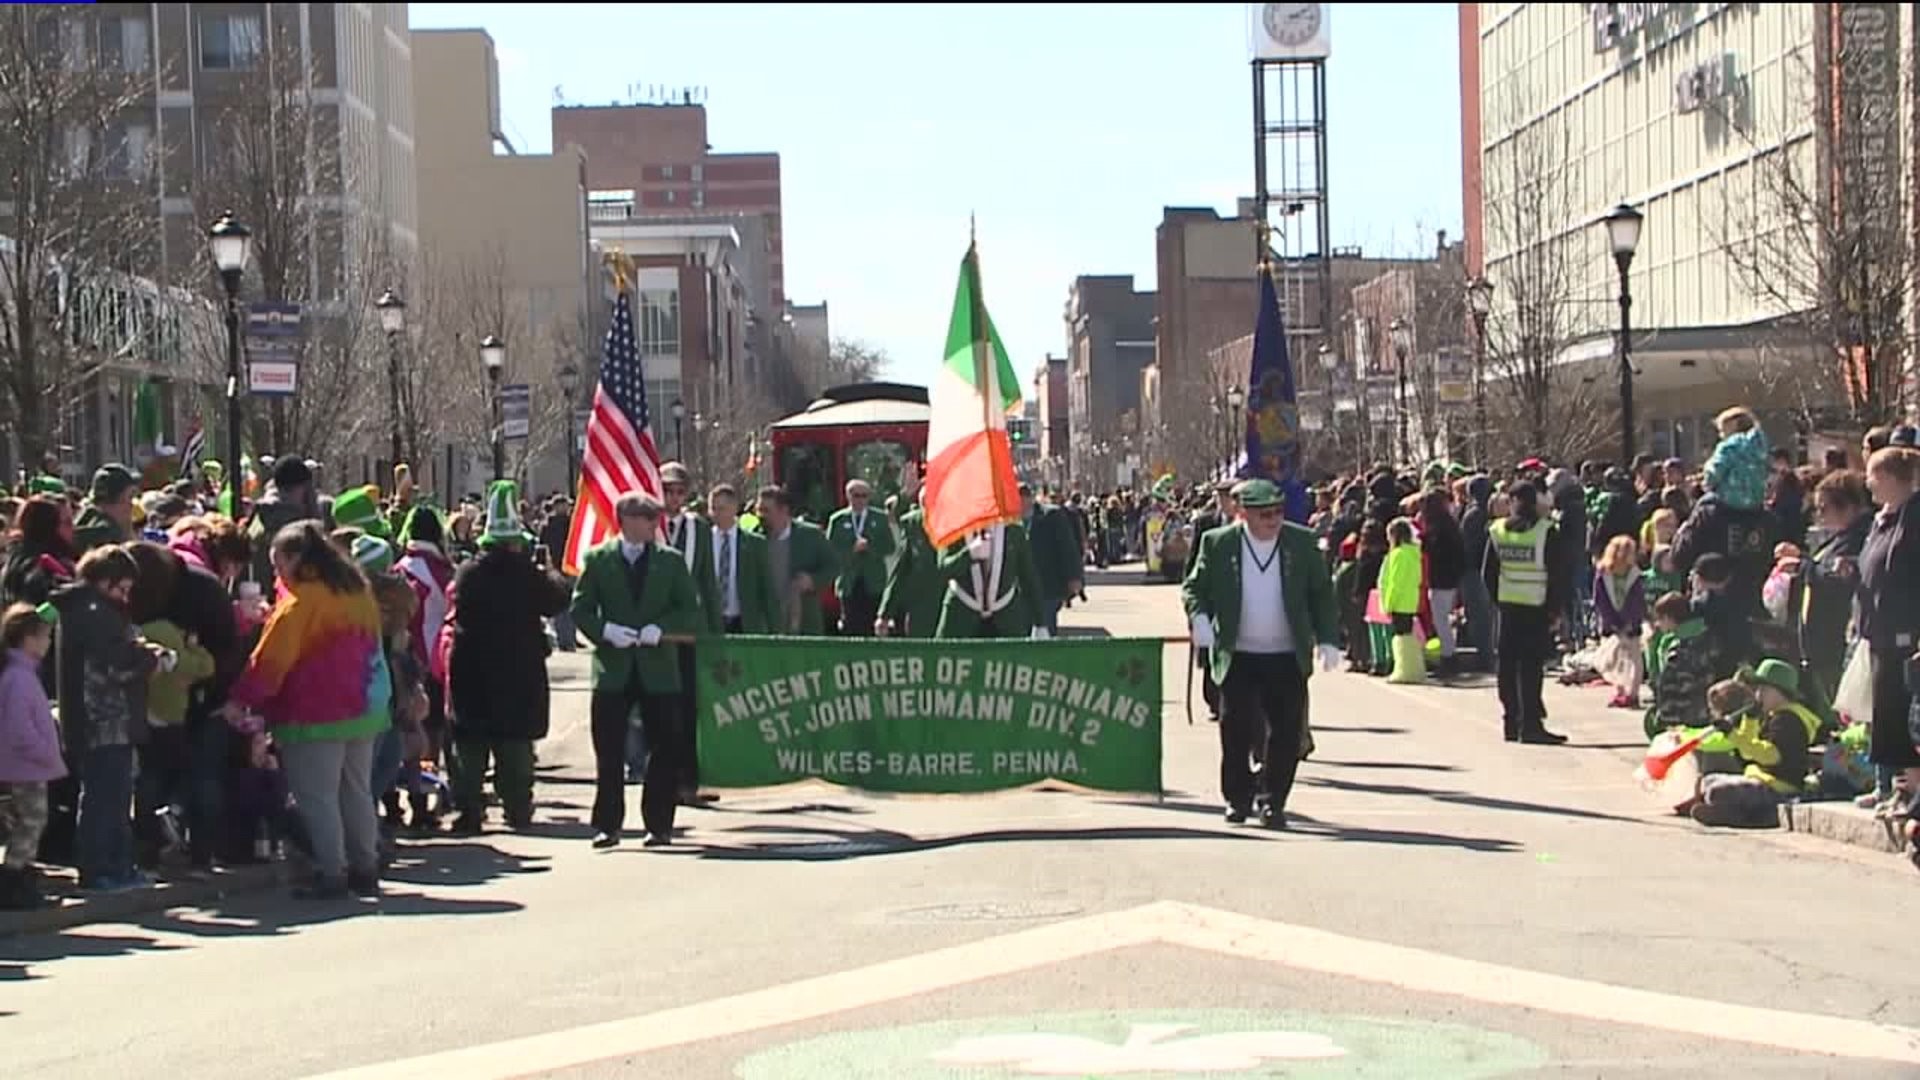 St. Patrick's Day Parade in Wilkes-Barre